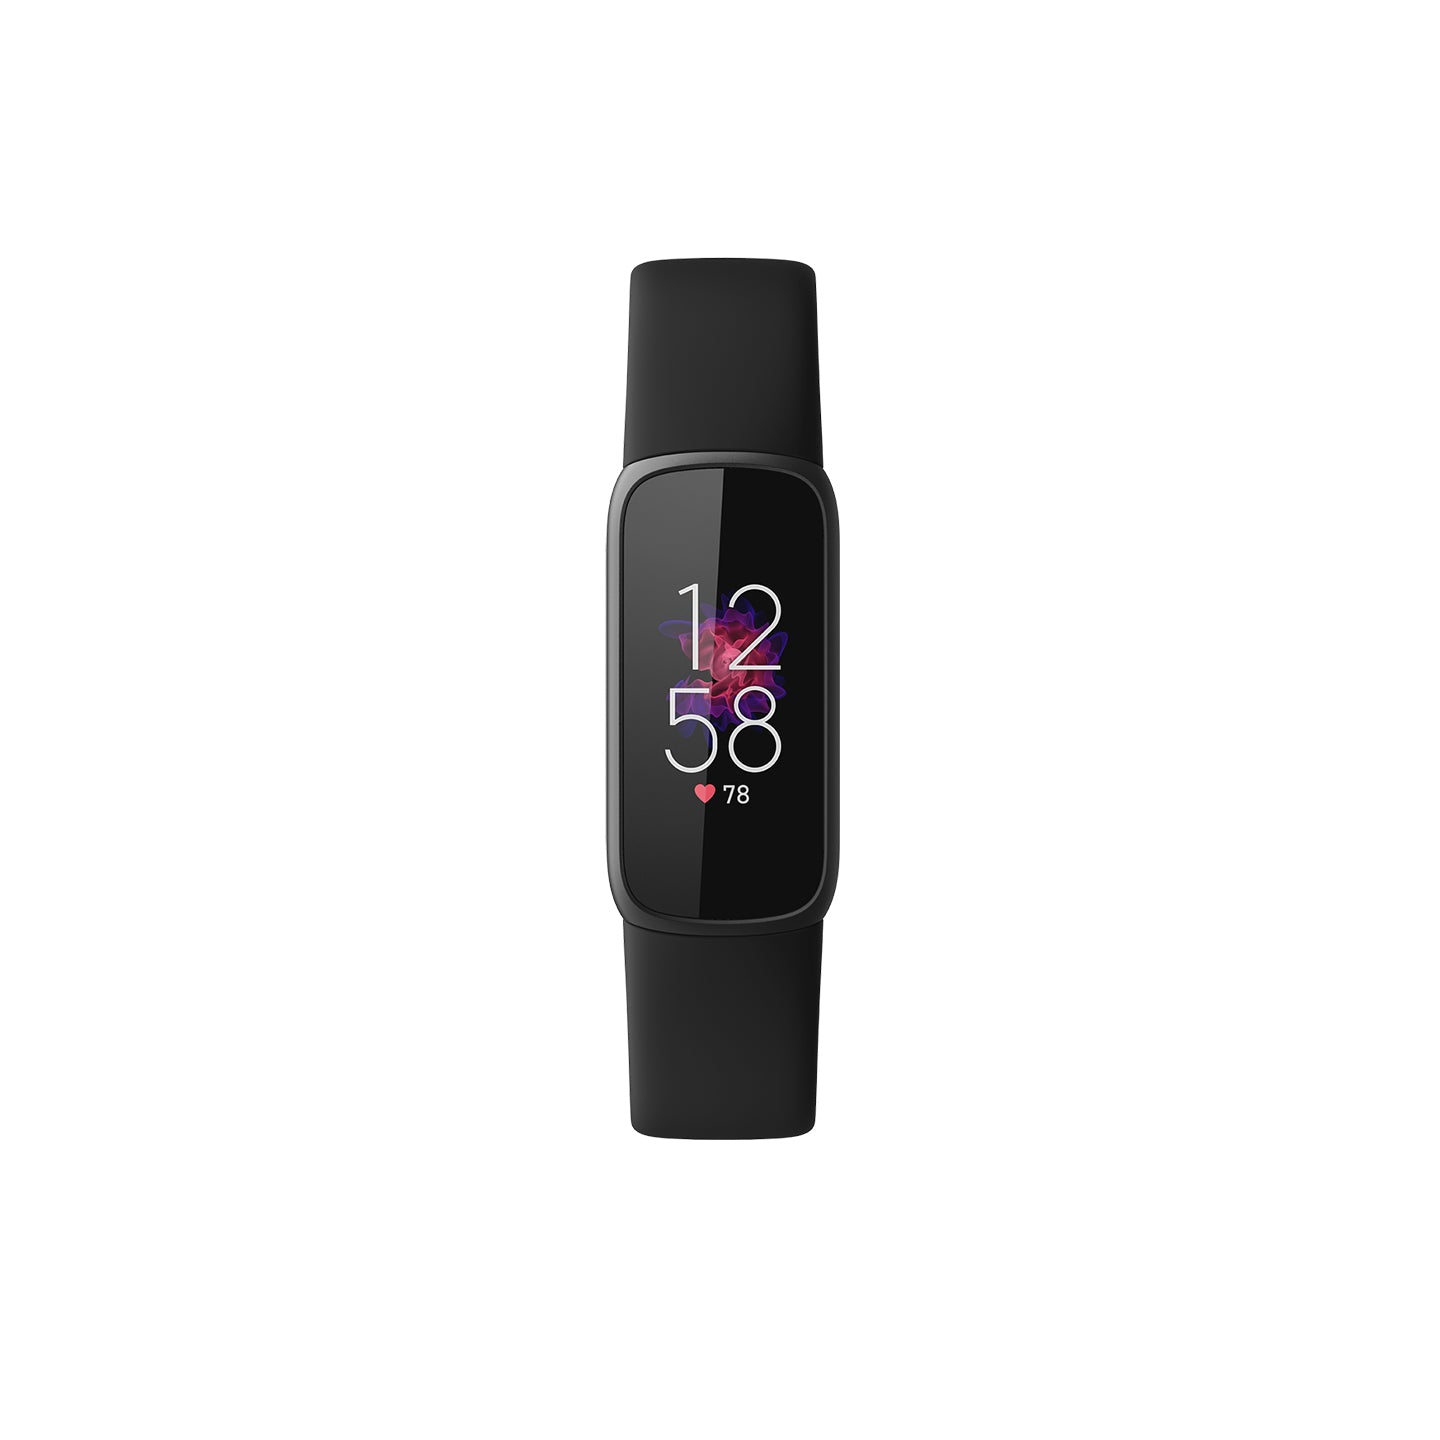 Fitbit Luxe Fitness and Wellness Tracker Water Resistant Watch with Oxygen Saturation Monitoring, Call / Text & Smartphone Notifications, 20 Exercise Modes, Timer & Stopwatch